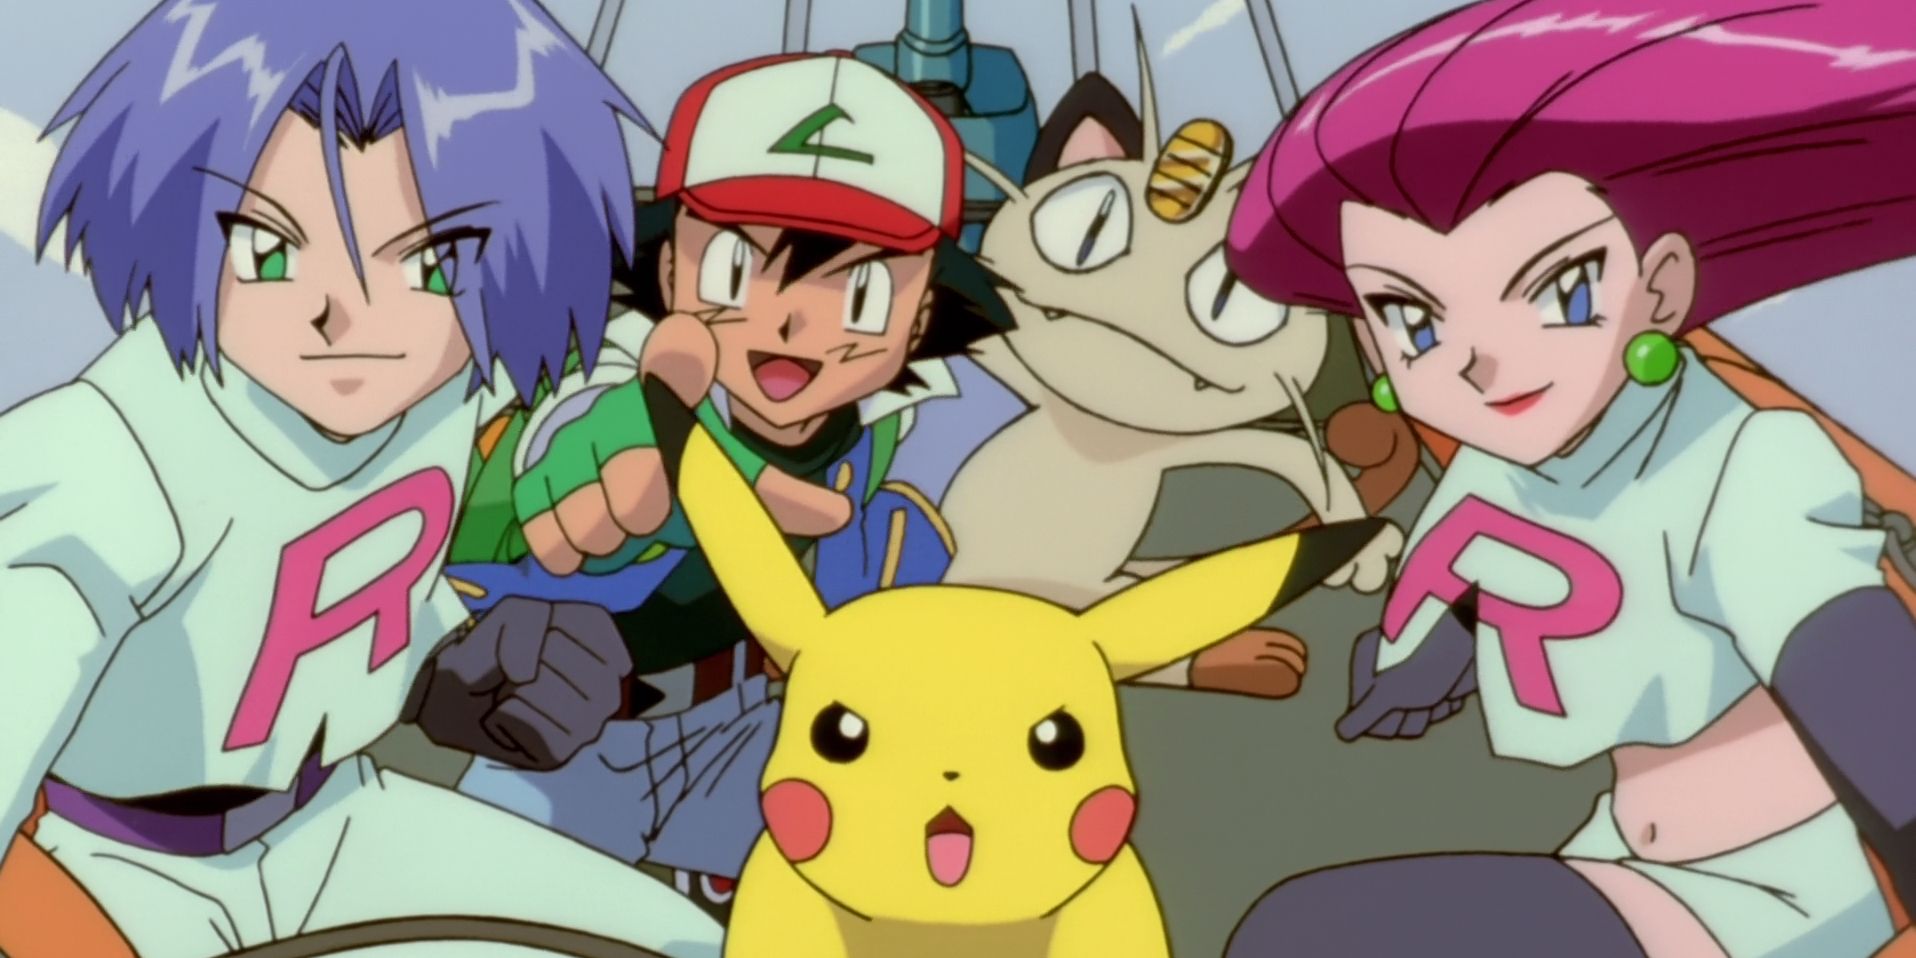 Team Rocket, Ash, and Pikachu posing in Pokemon The Movie 2000.